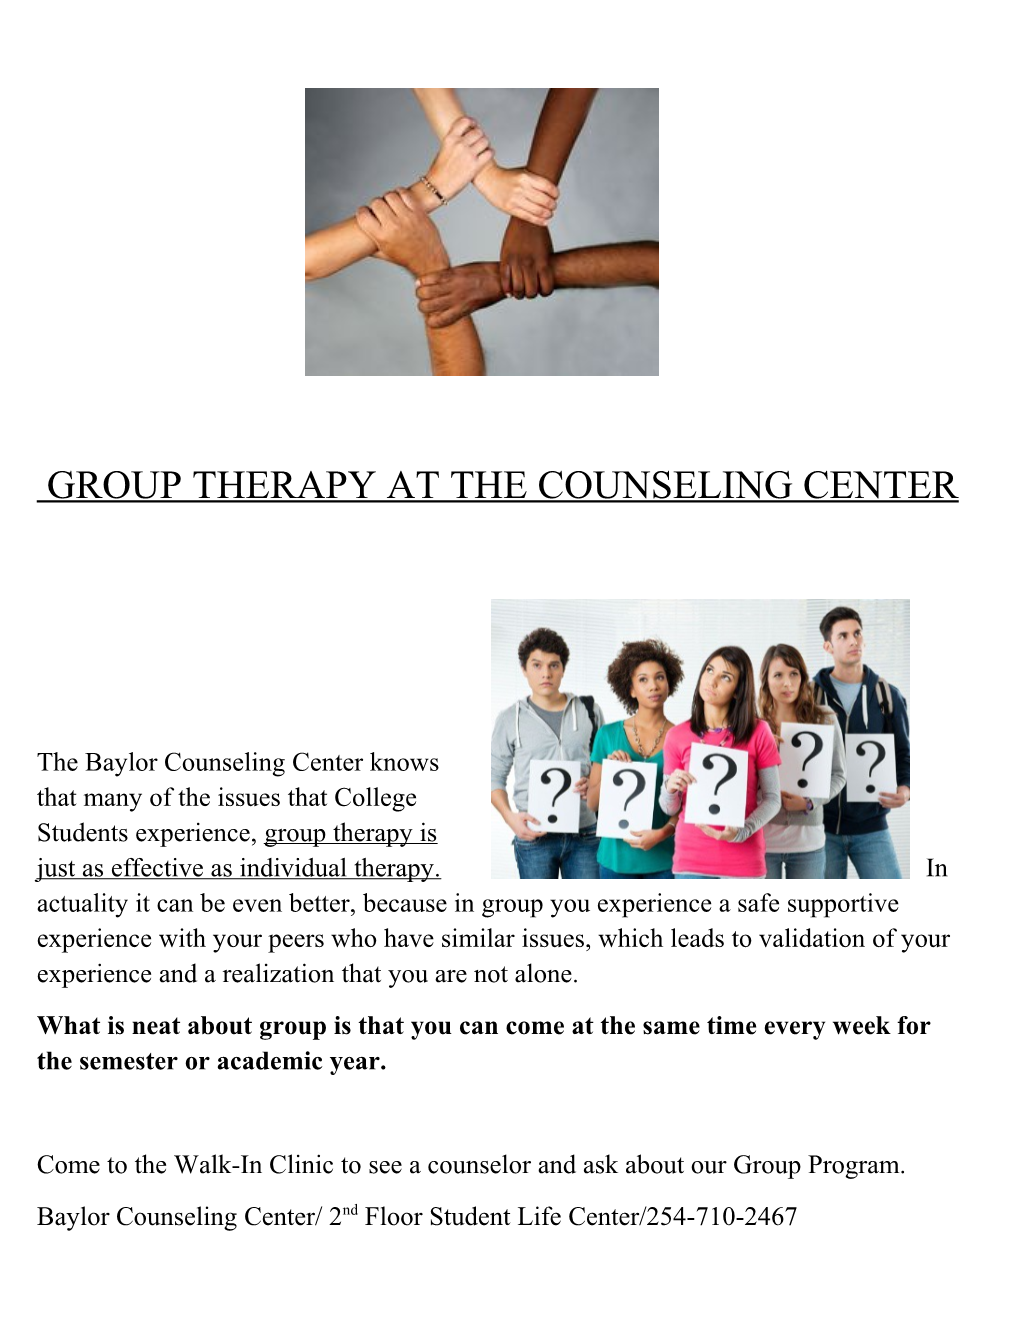 Group Therapy at the Counseling Center